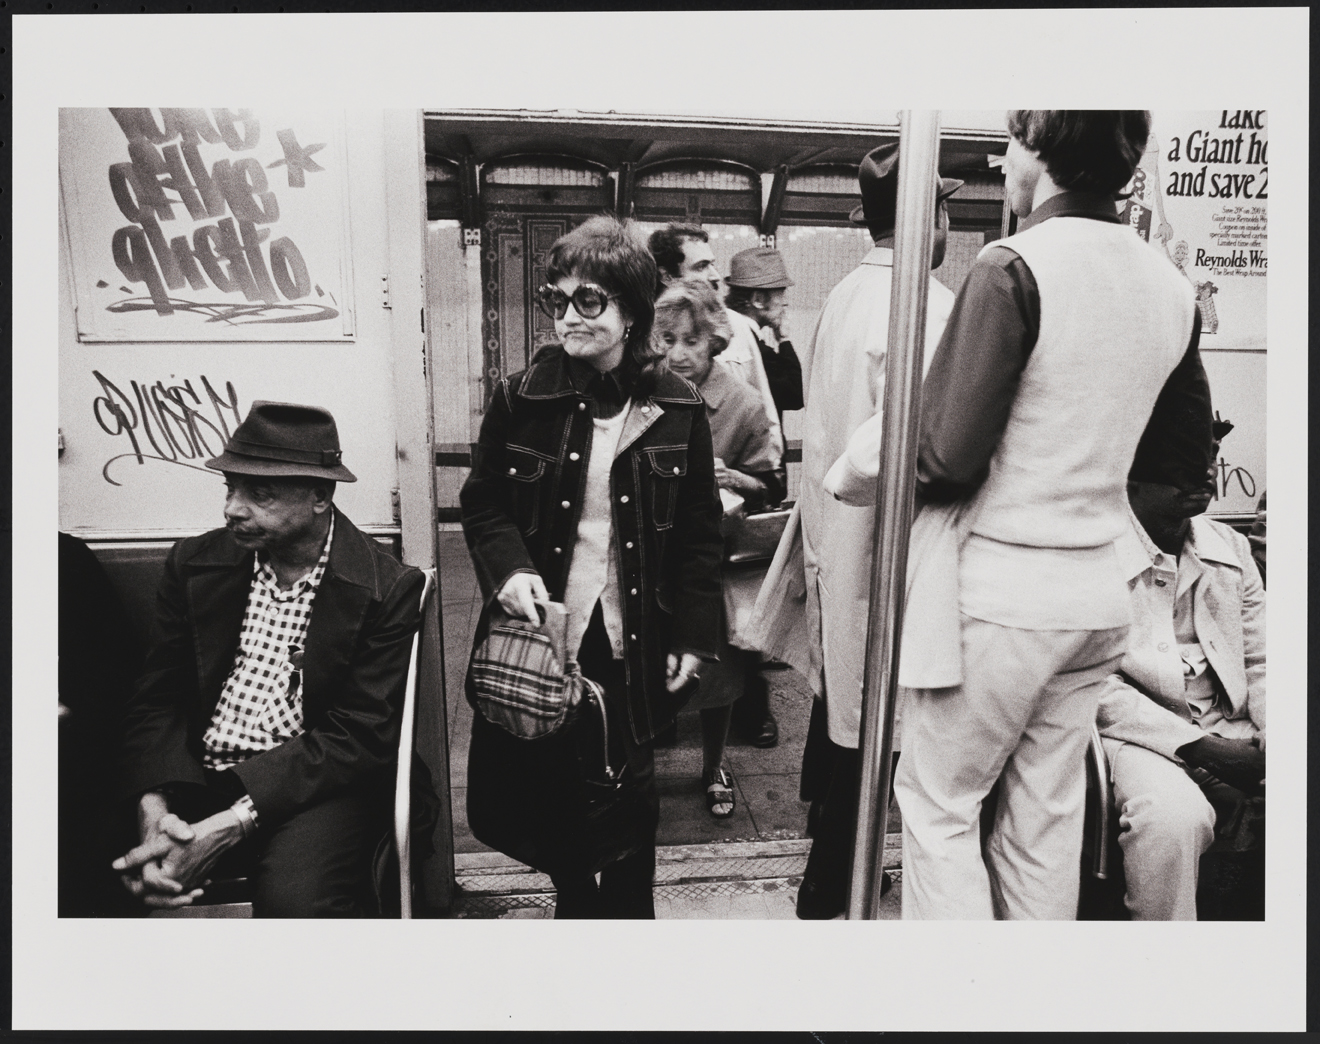 Leland Bobbé, Subway [Voice of the Ghetto], 1974. Archival pigment print. Gift of the photographer. 2016.10.7.